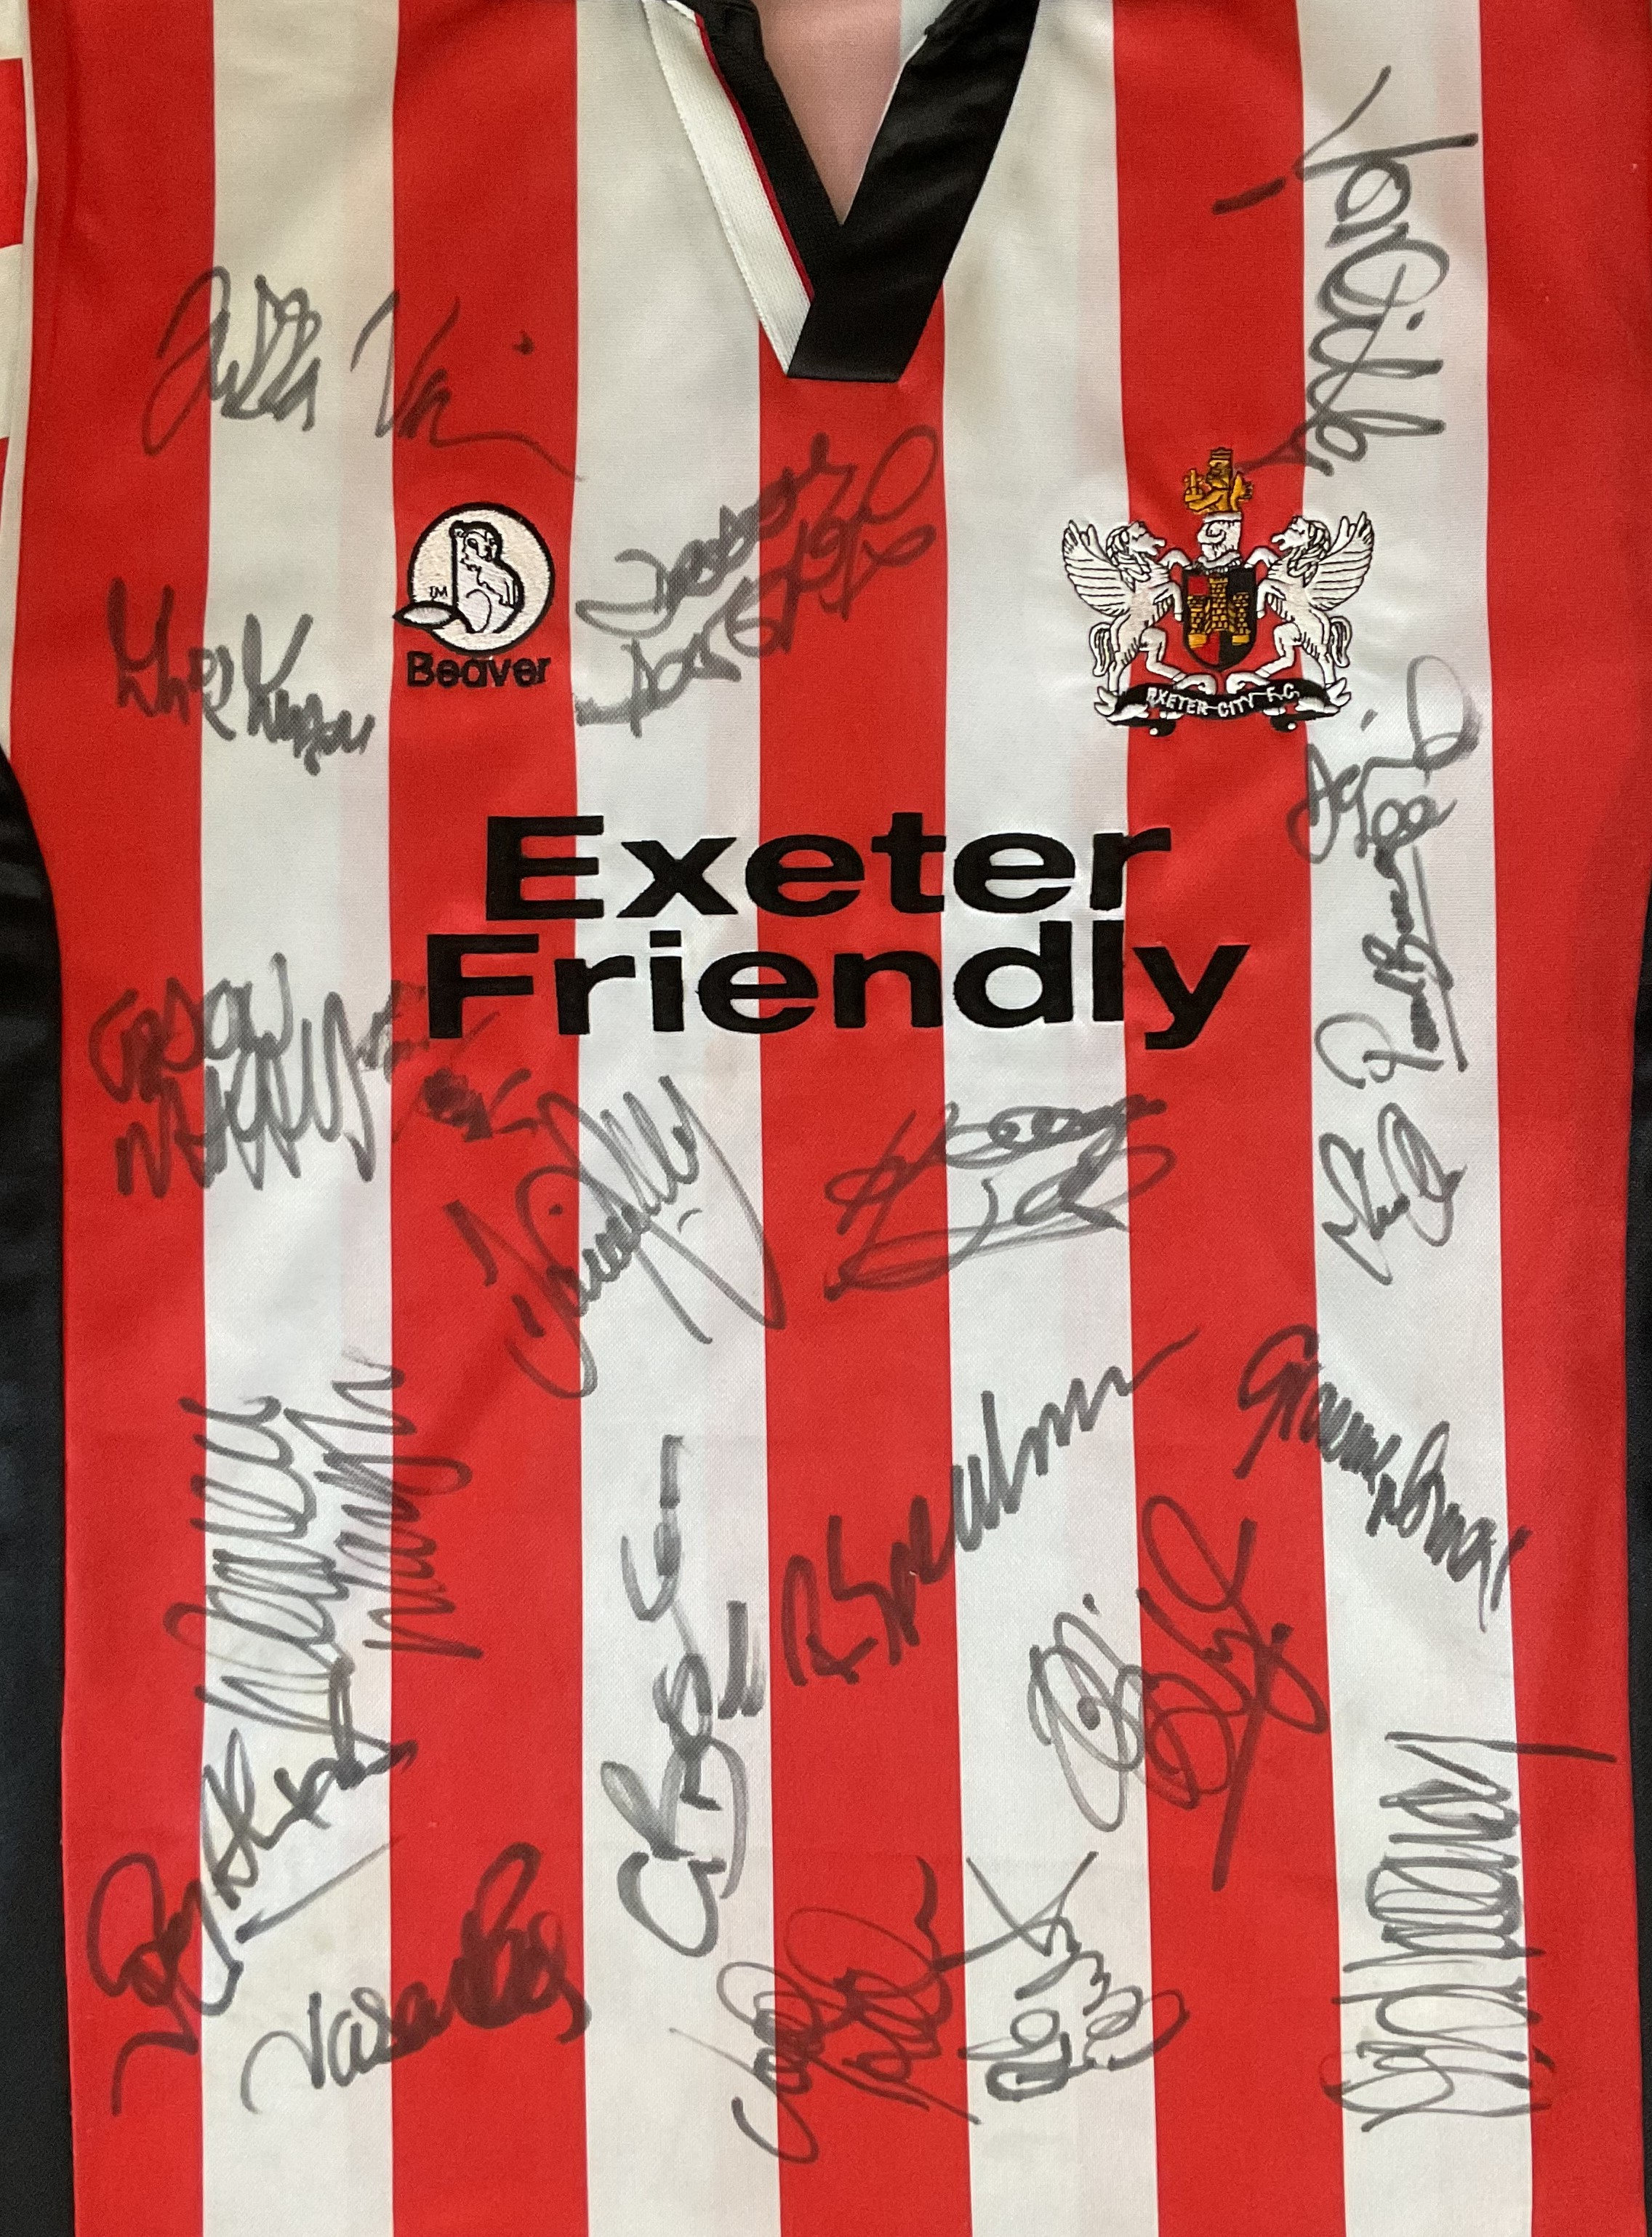 Football Exeter City FC 20 Signed 1999-2000 Replica Home Jersey. Good condition. All autographs come - Image 2 of 2